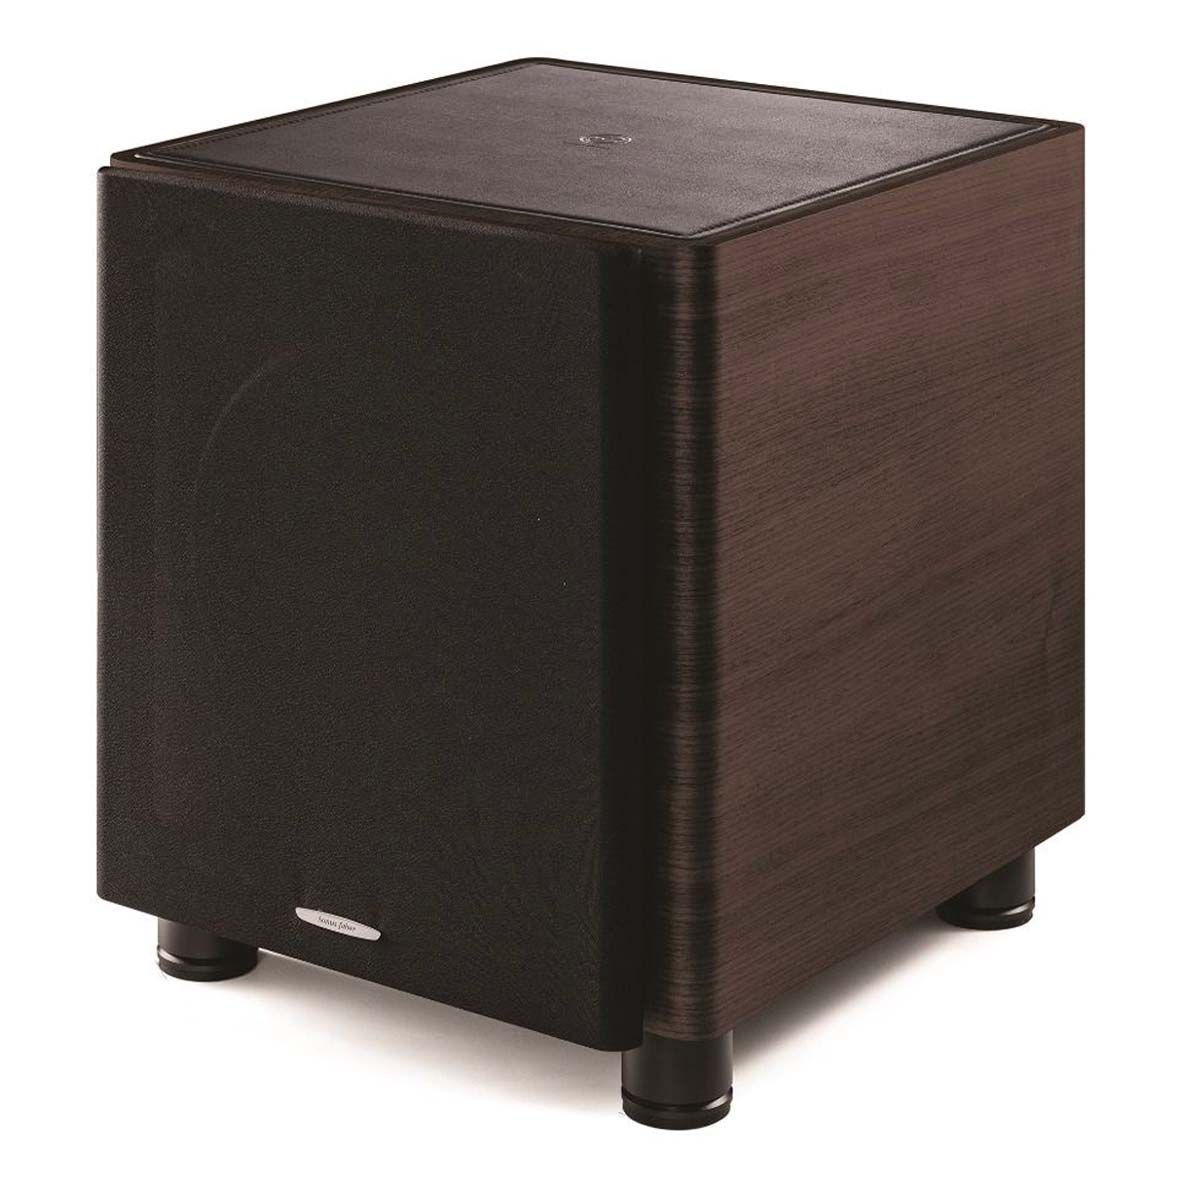 Sonus Faber Gravis II 10" Powered Subwoofer wenge angled front view with grille